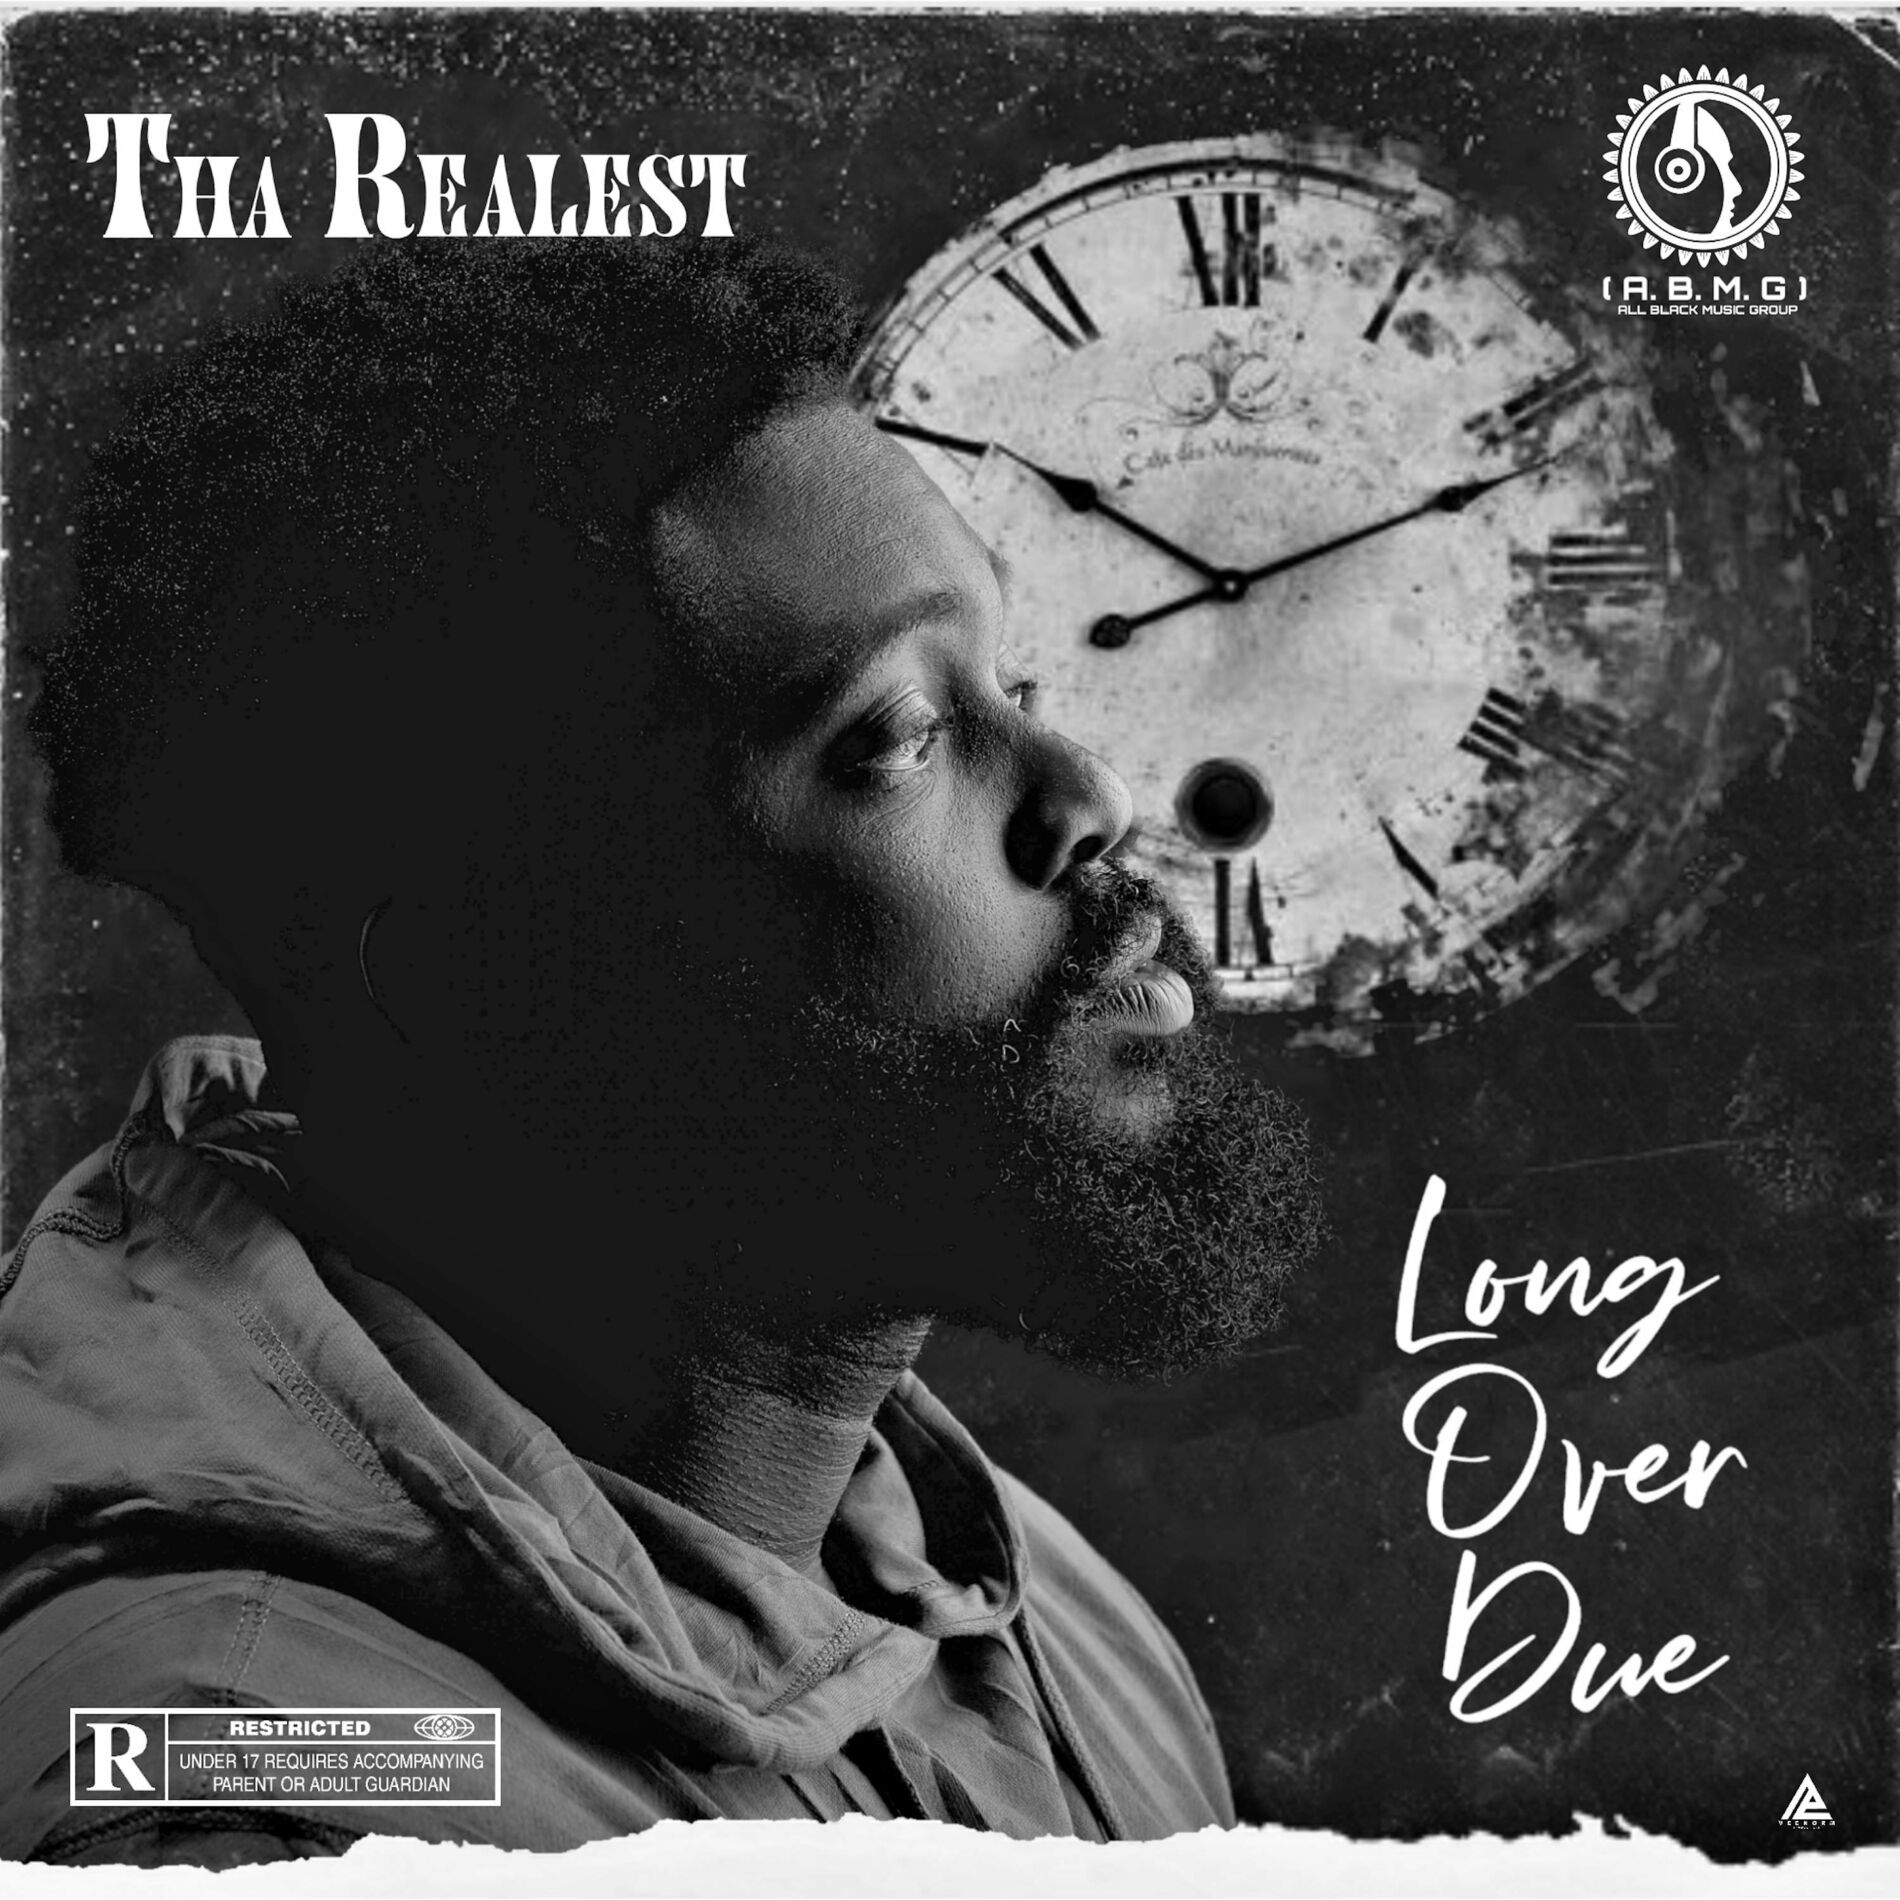 Tha Realest: albums, songs, playlists | Listen on Deezer